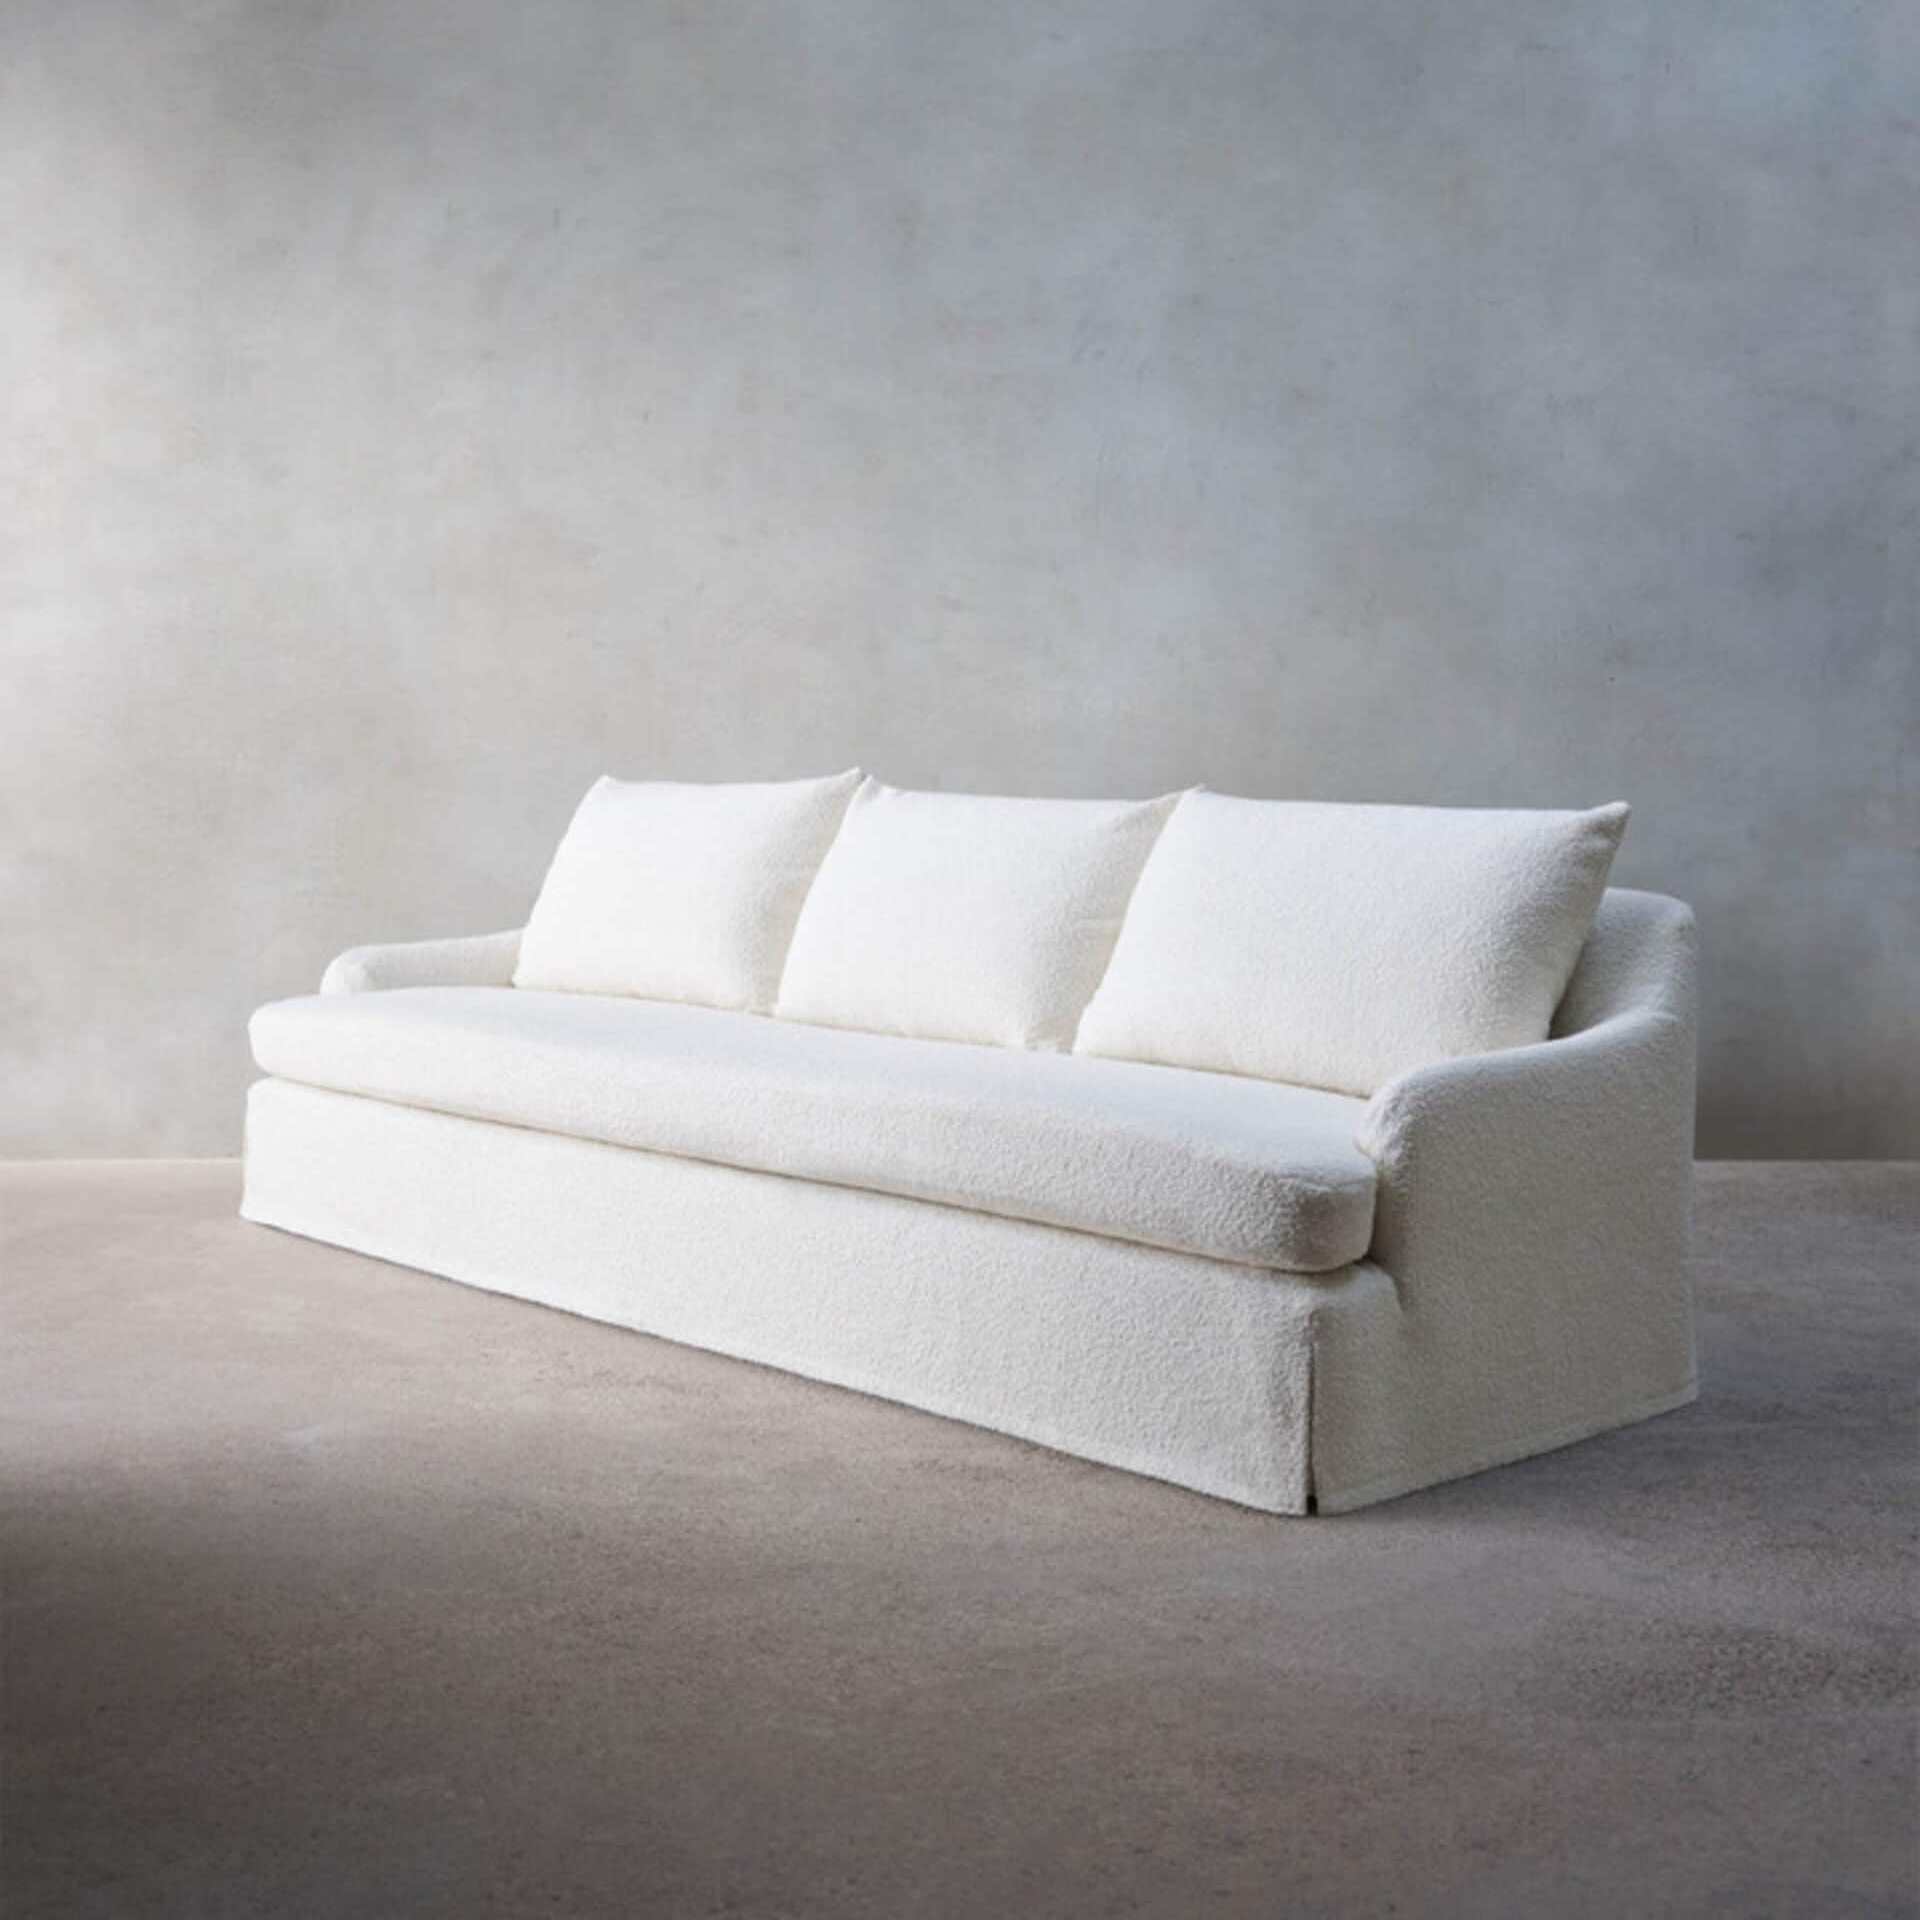 Чехол для дивана из ткани букле Zara Home+ By Vincent Van Duysen Sofa 01, белый 1 6 scale fashion sofa cloth fabric long couch model toy sofa model toys collection gift free shipping